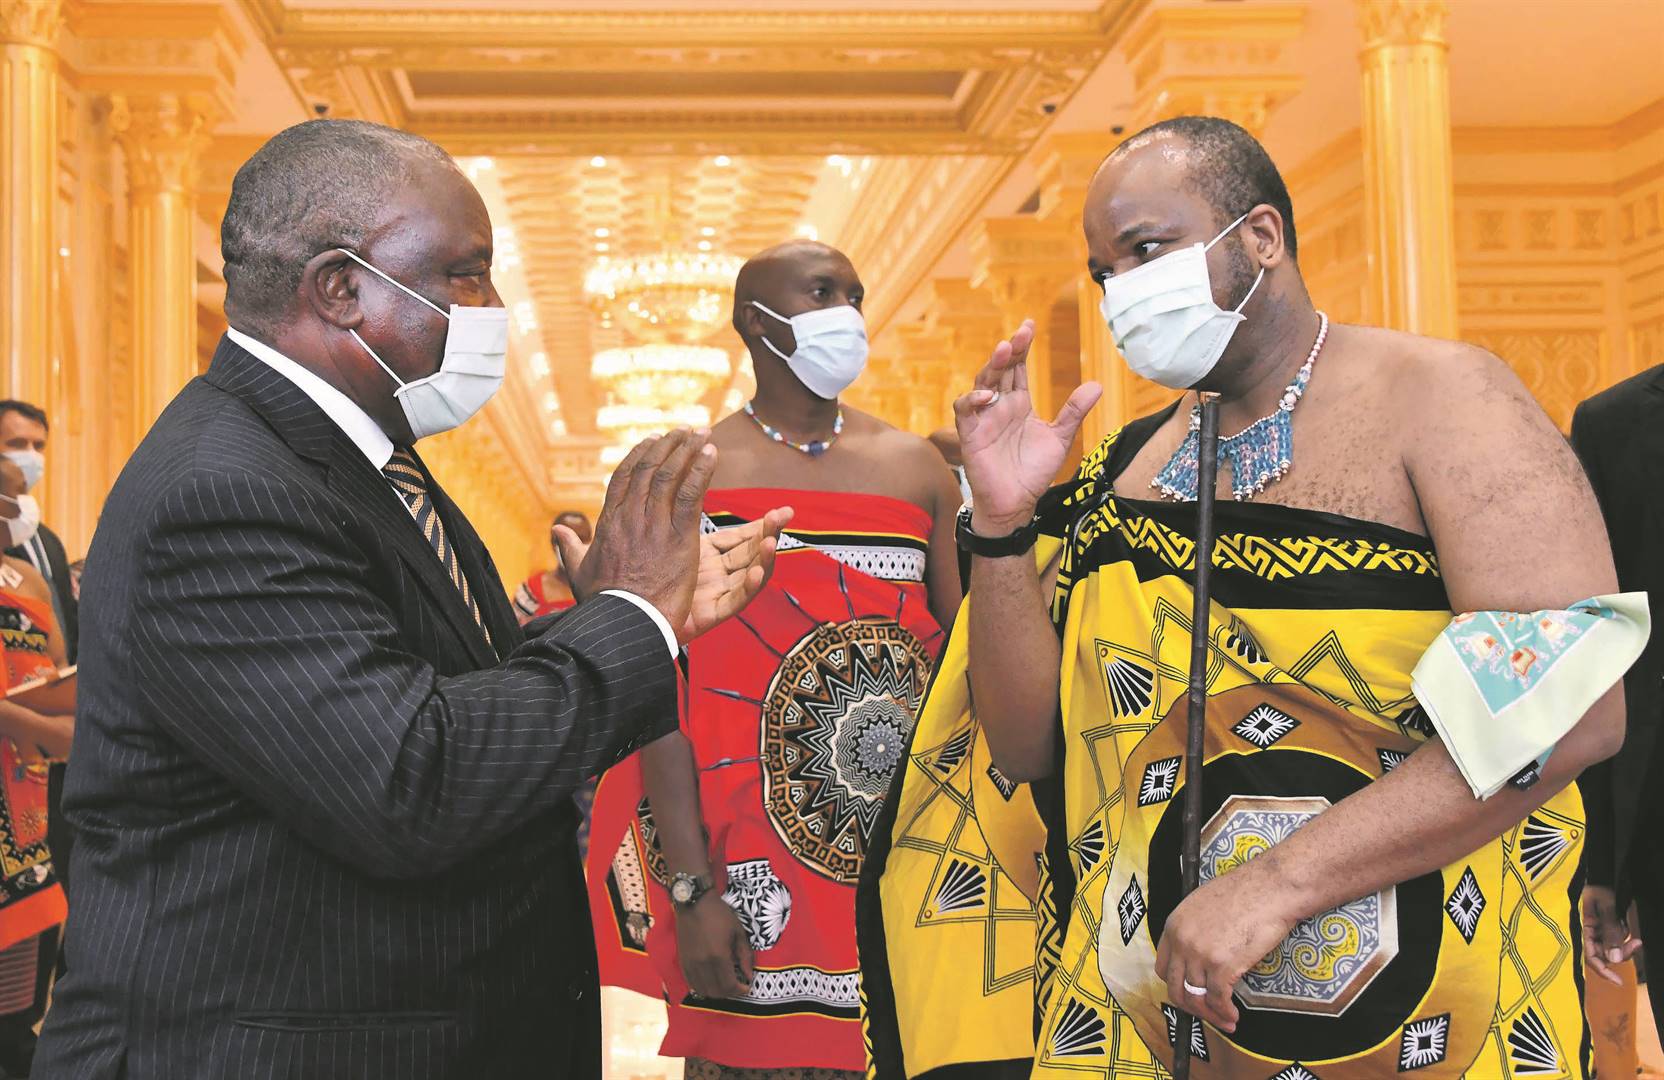 President Cyril Ramaphosa, in his capacity as chair of the SADC Organ for Politics, Defence and Security, met with King Mswati III about the unrest. Photo: Elmond Jiyane / GCIS